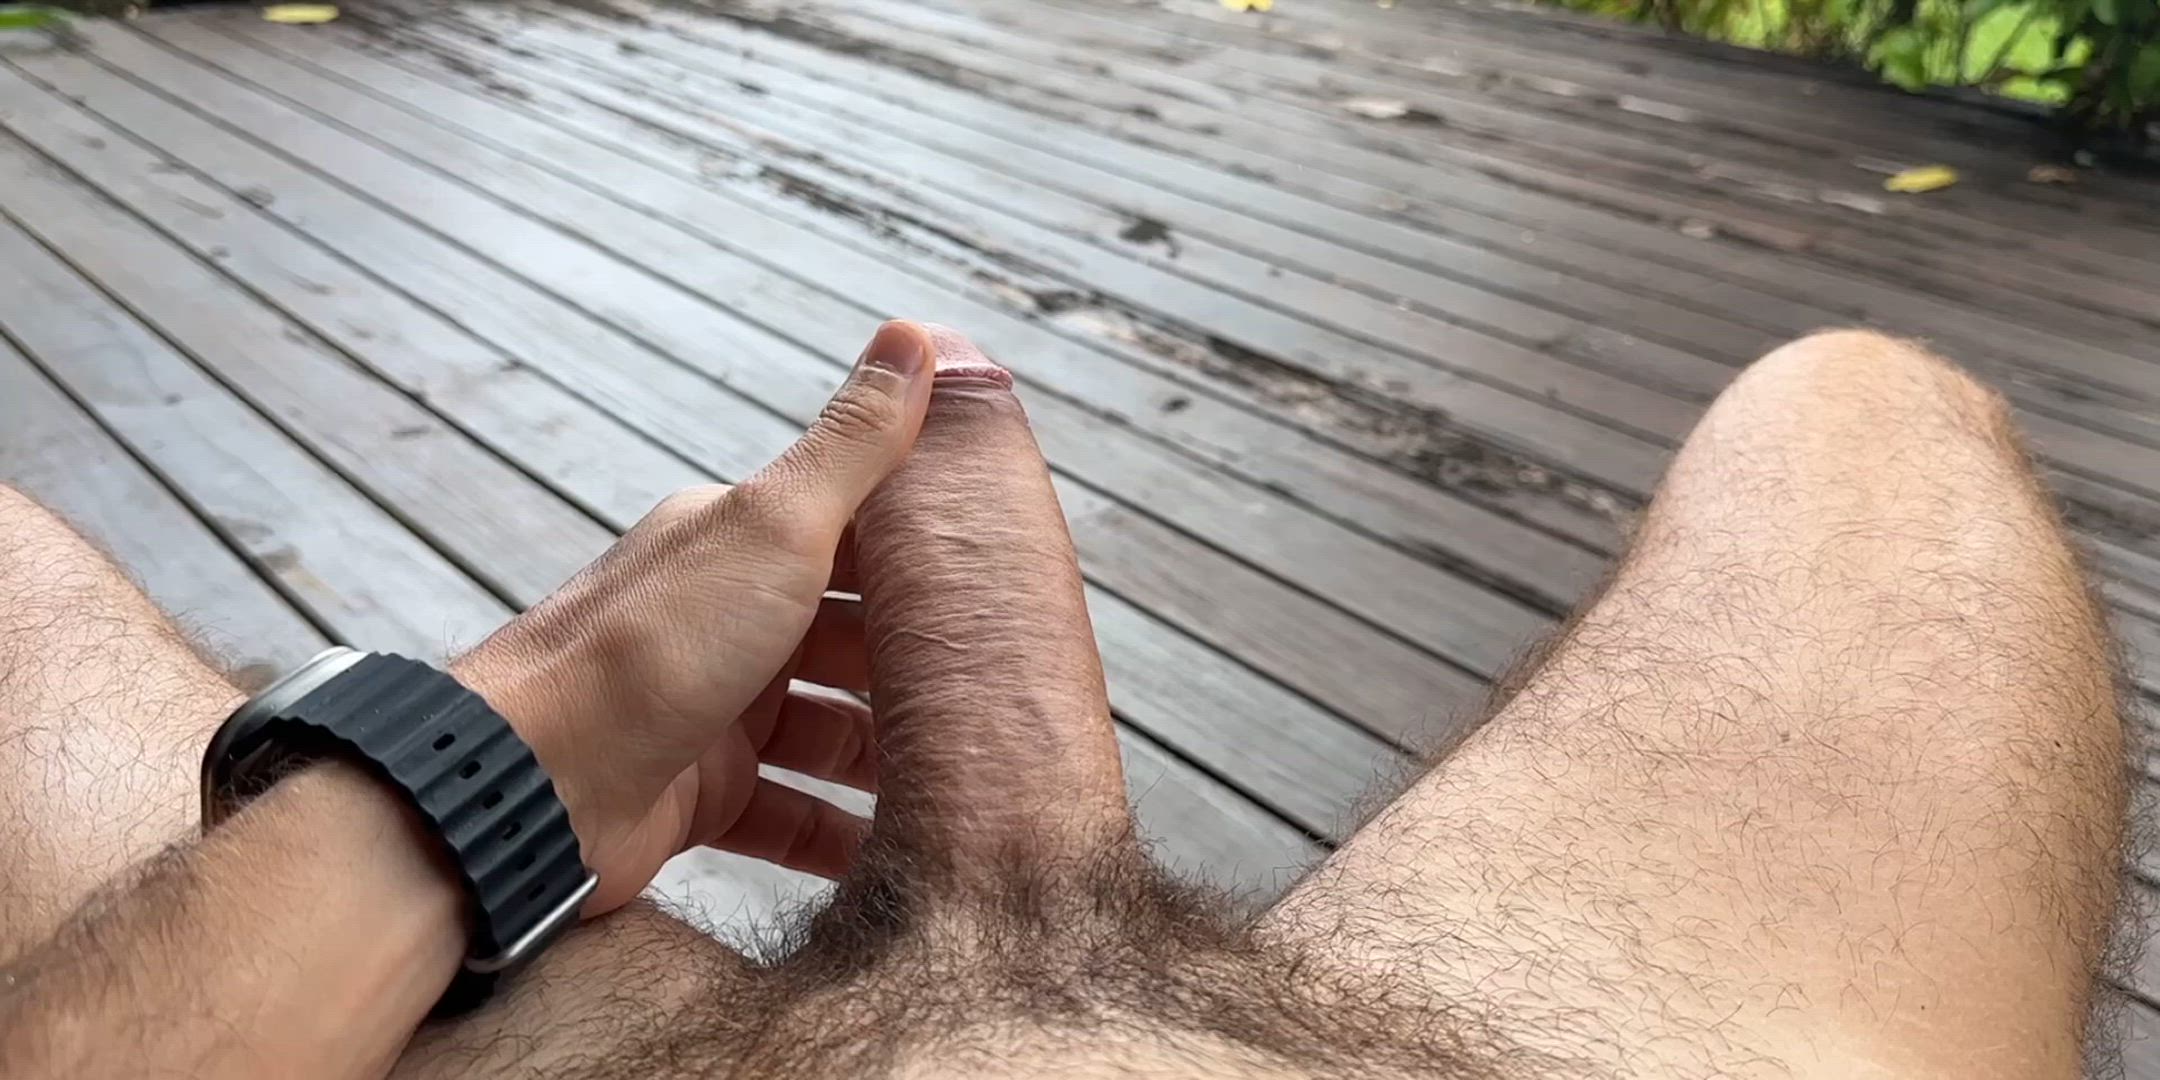 Big Dick porn video with onlyfans model andolinixxl <strong>@andolini691</strong>